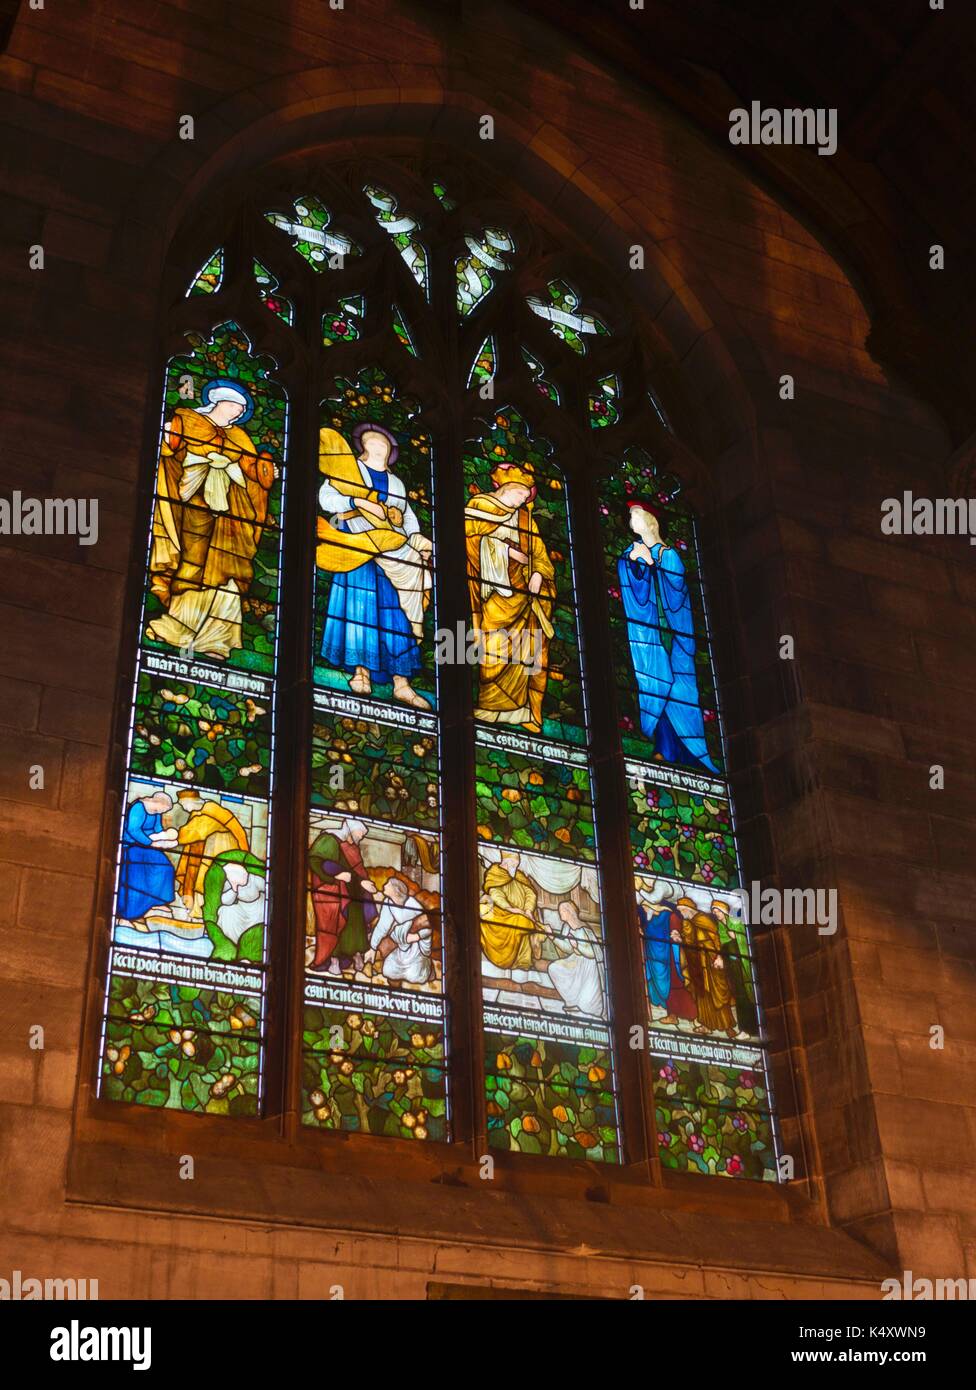 Stained glass windows by Edward Burne-Jones, Church of All Hallows, Allerton, Liverpool, Church is noted for its stained glass windows and sculptures. Stock Photo